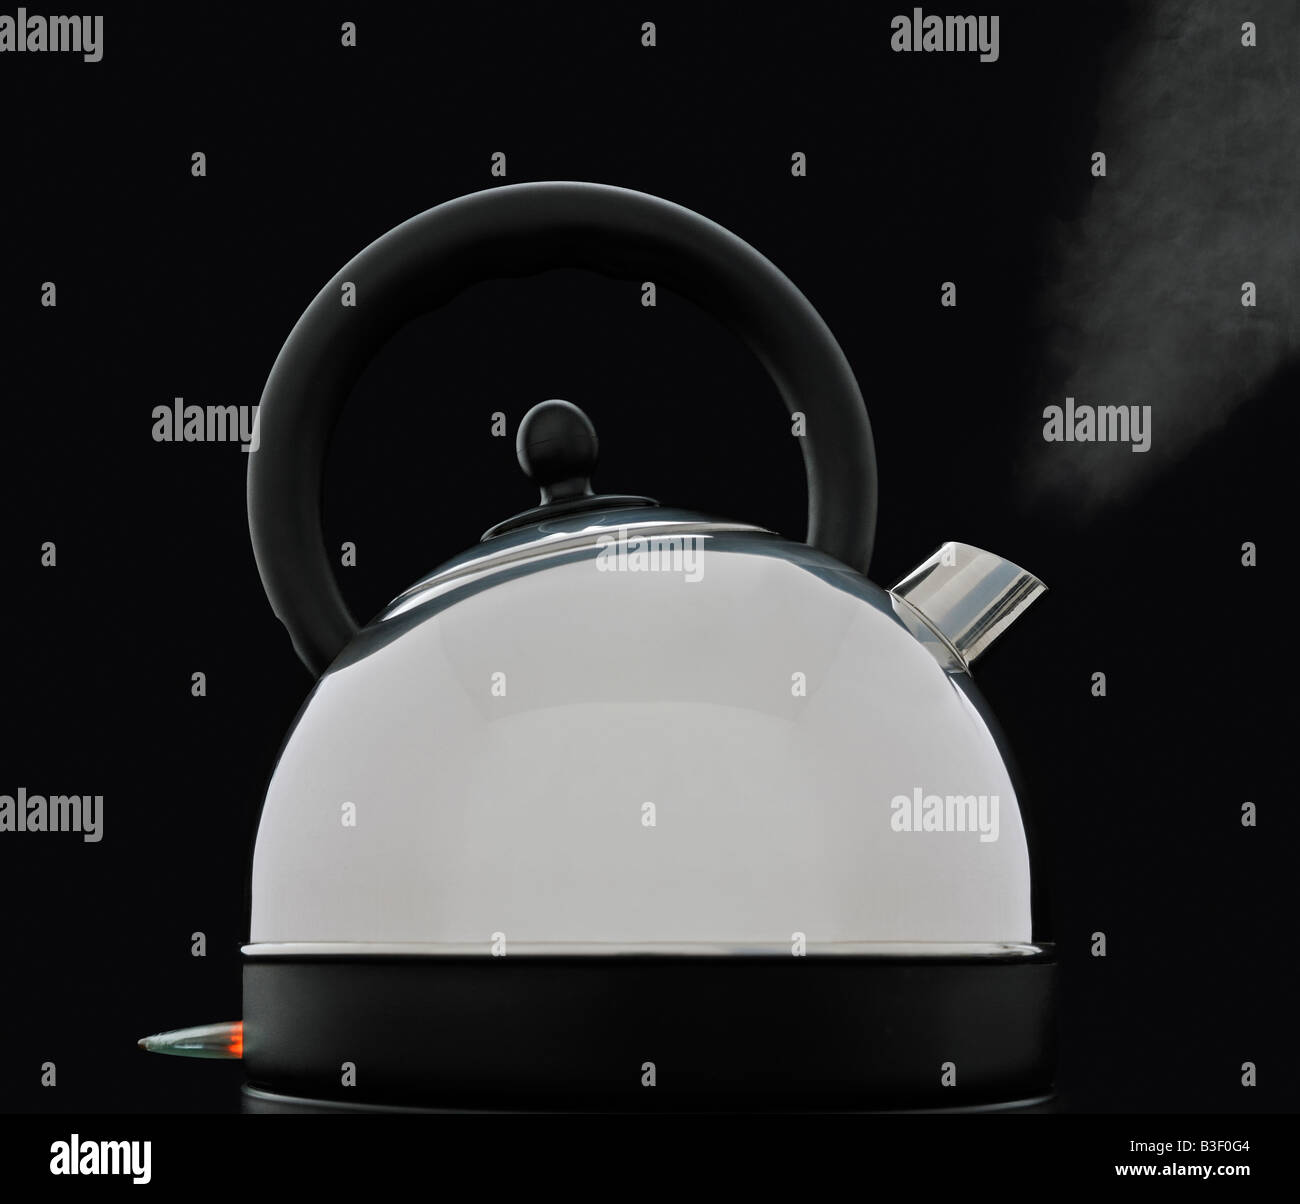 Boiling kettle Against a Black Background Stock Photo